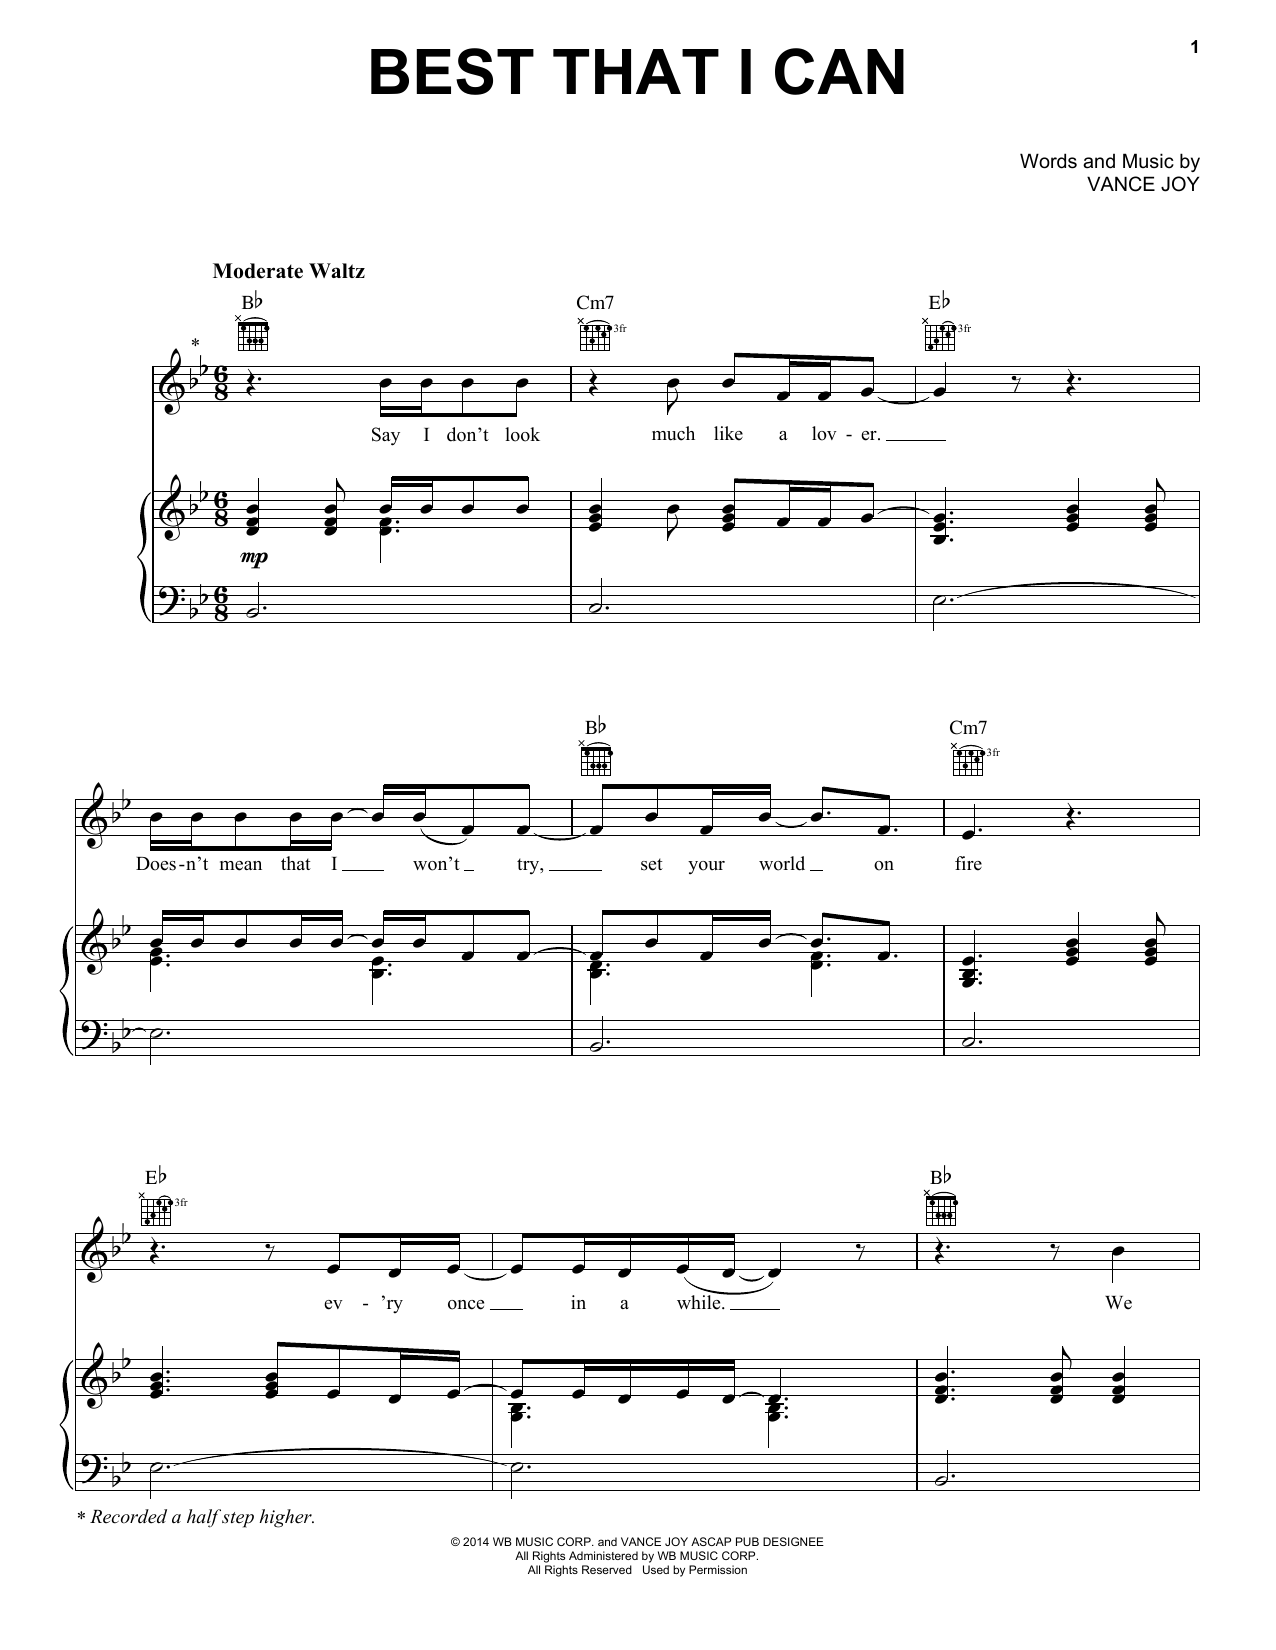 Download Vance Joy Best That I Can Sheet Music